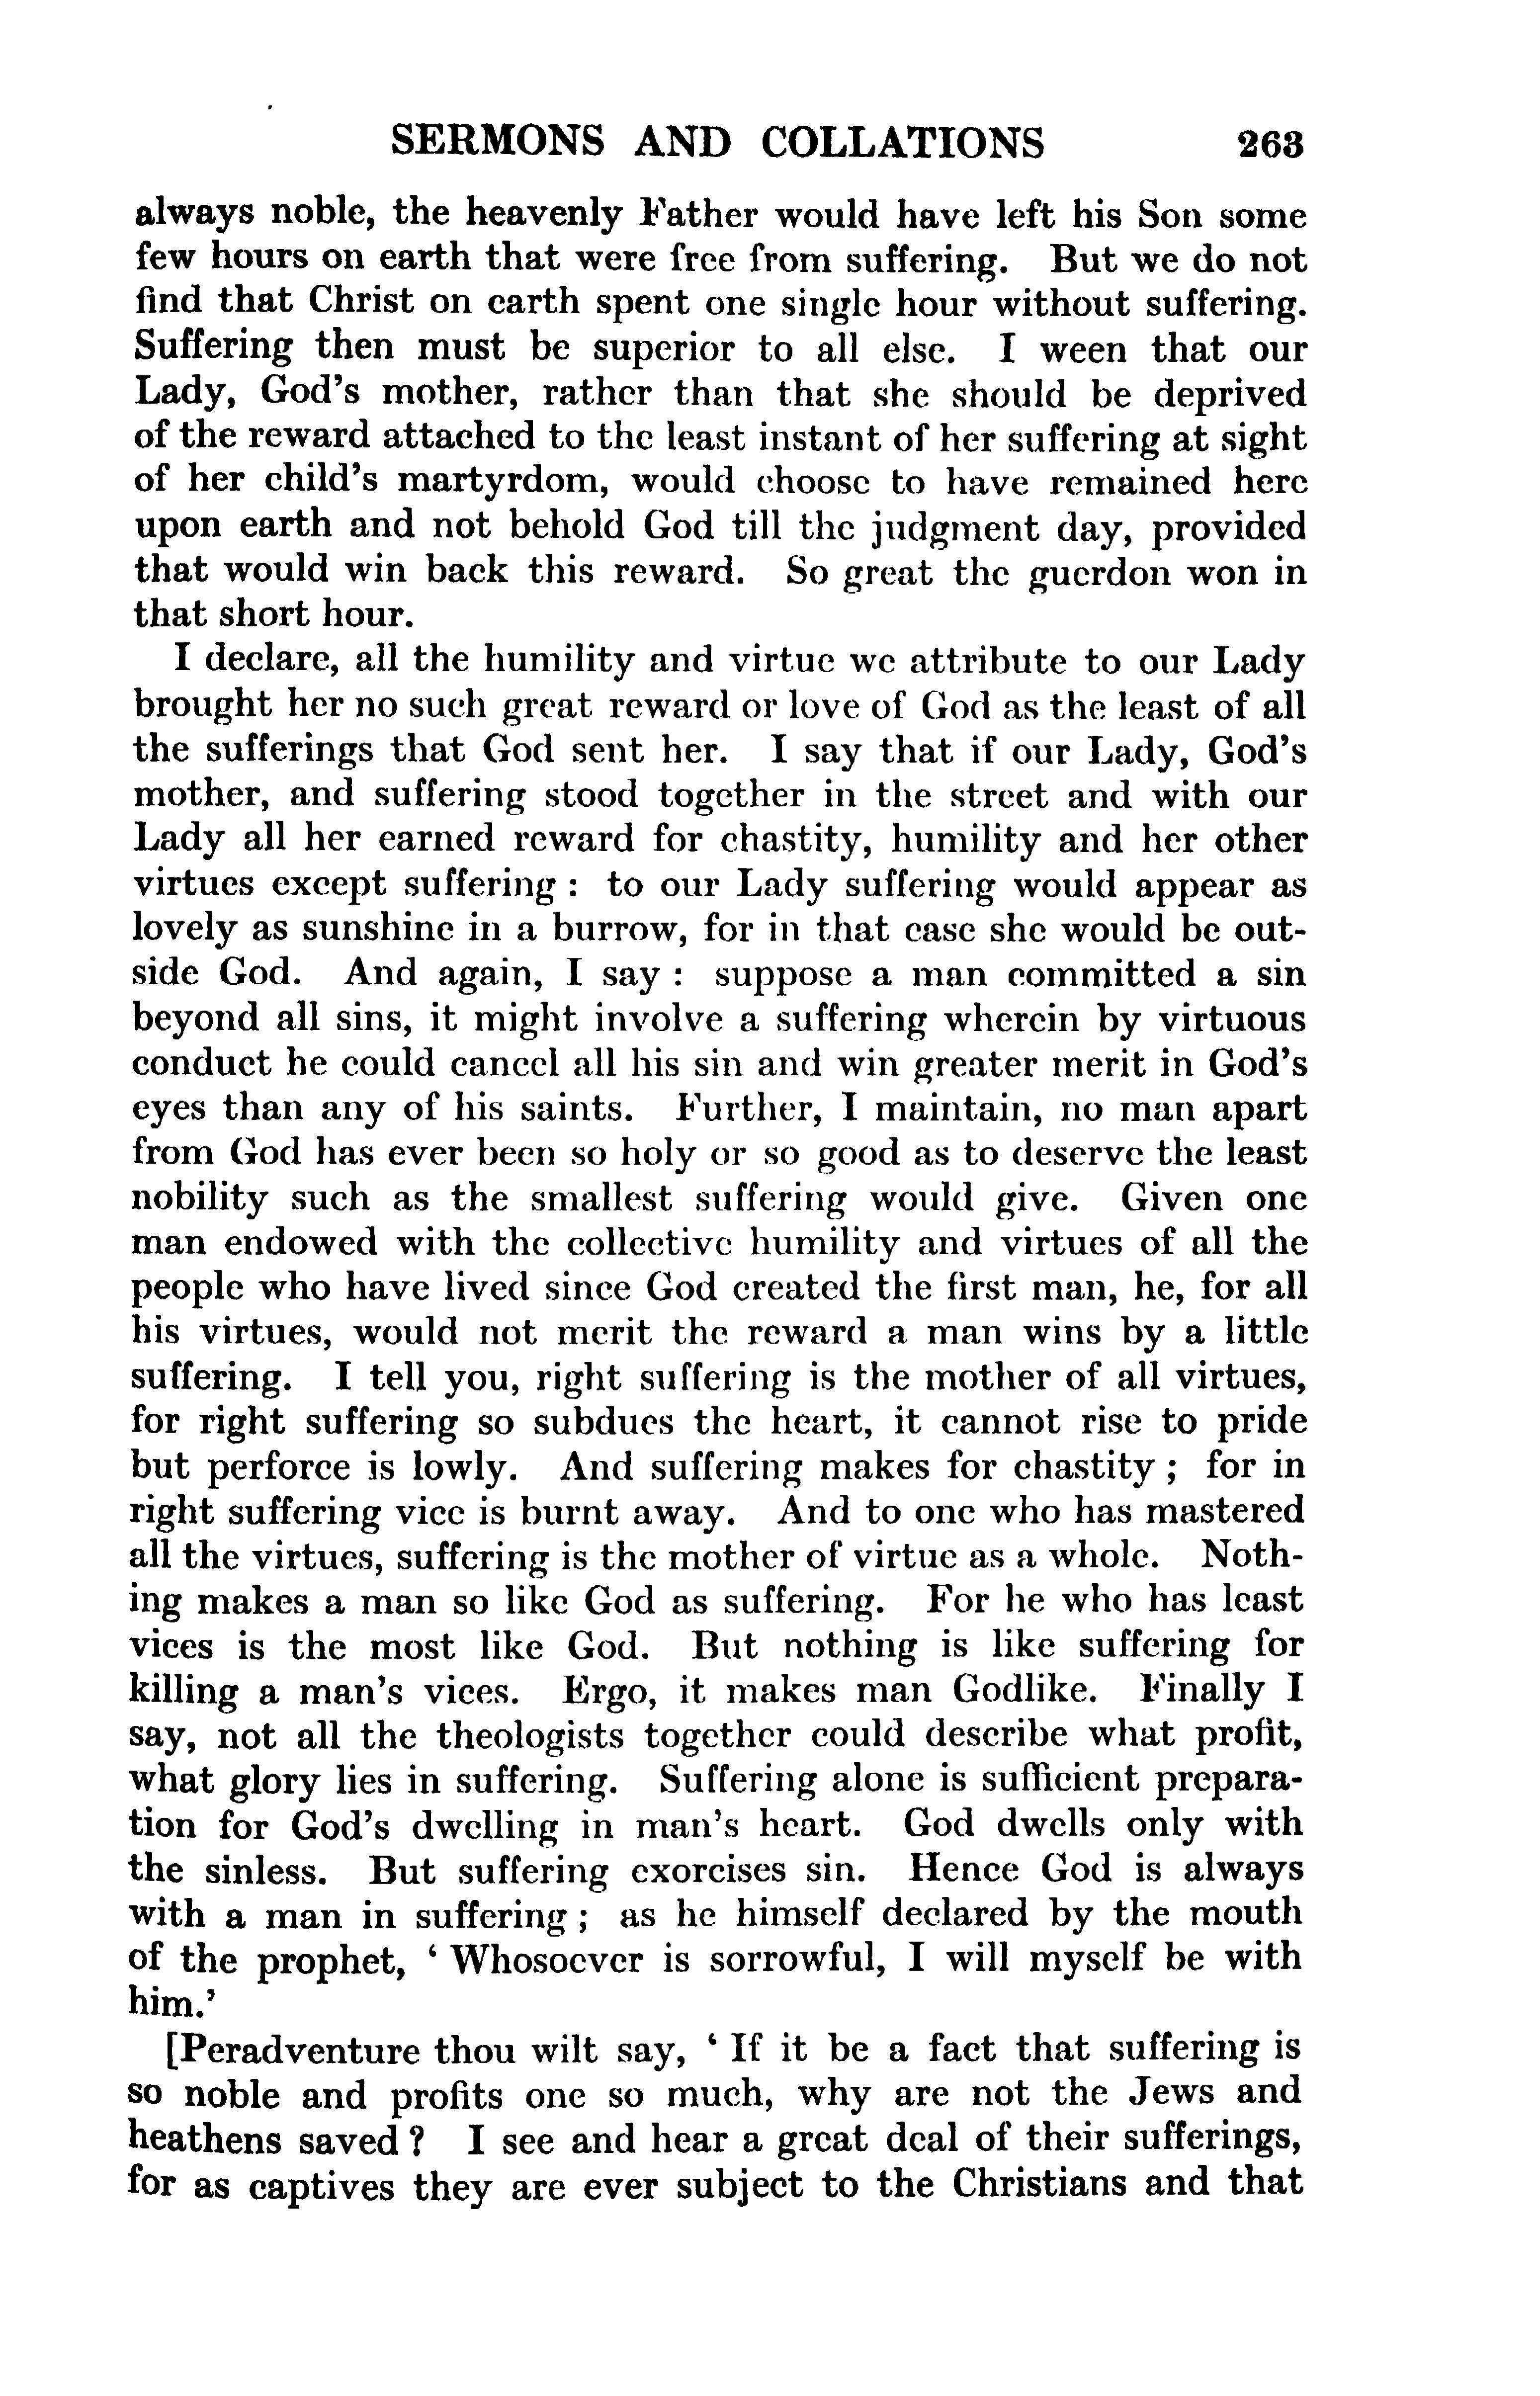 Image of page 0287